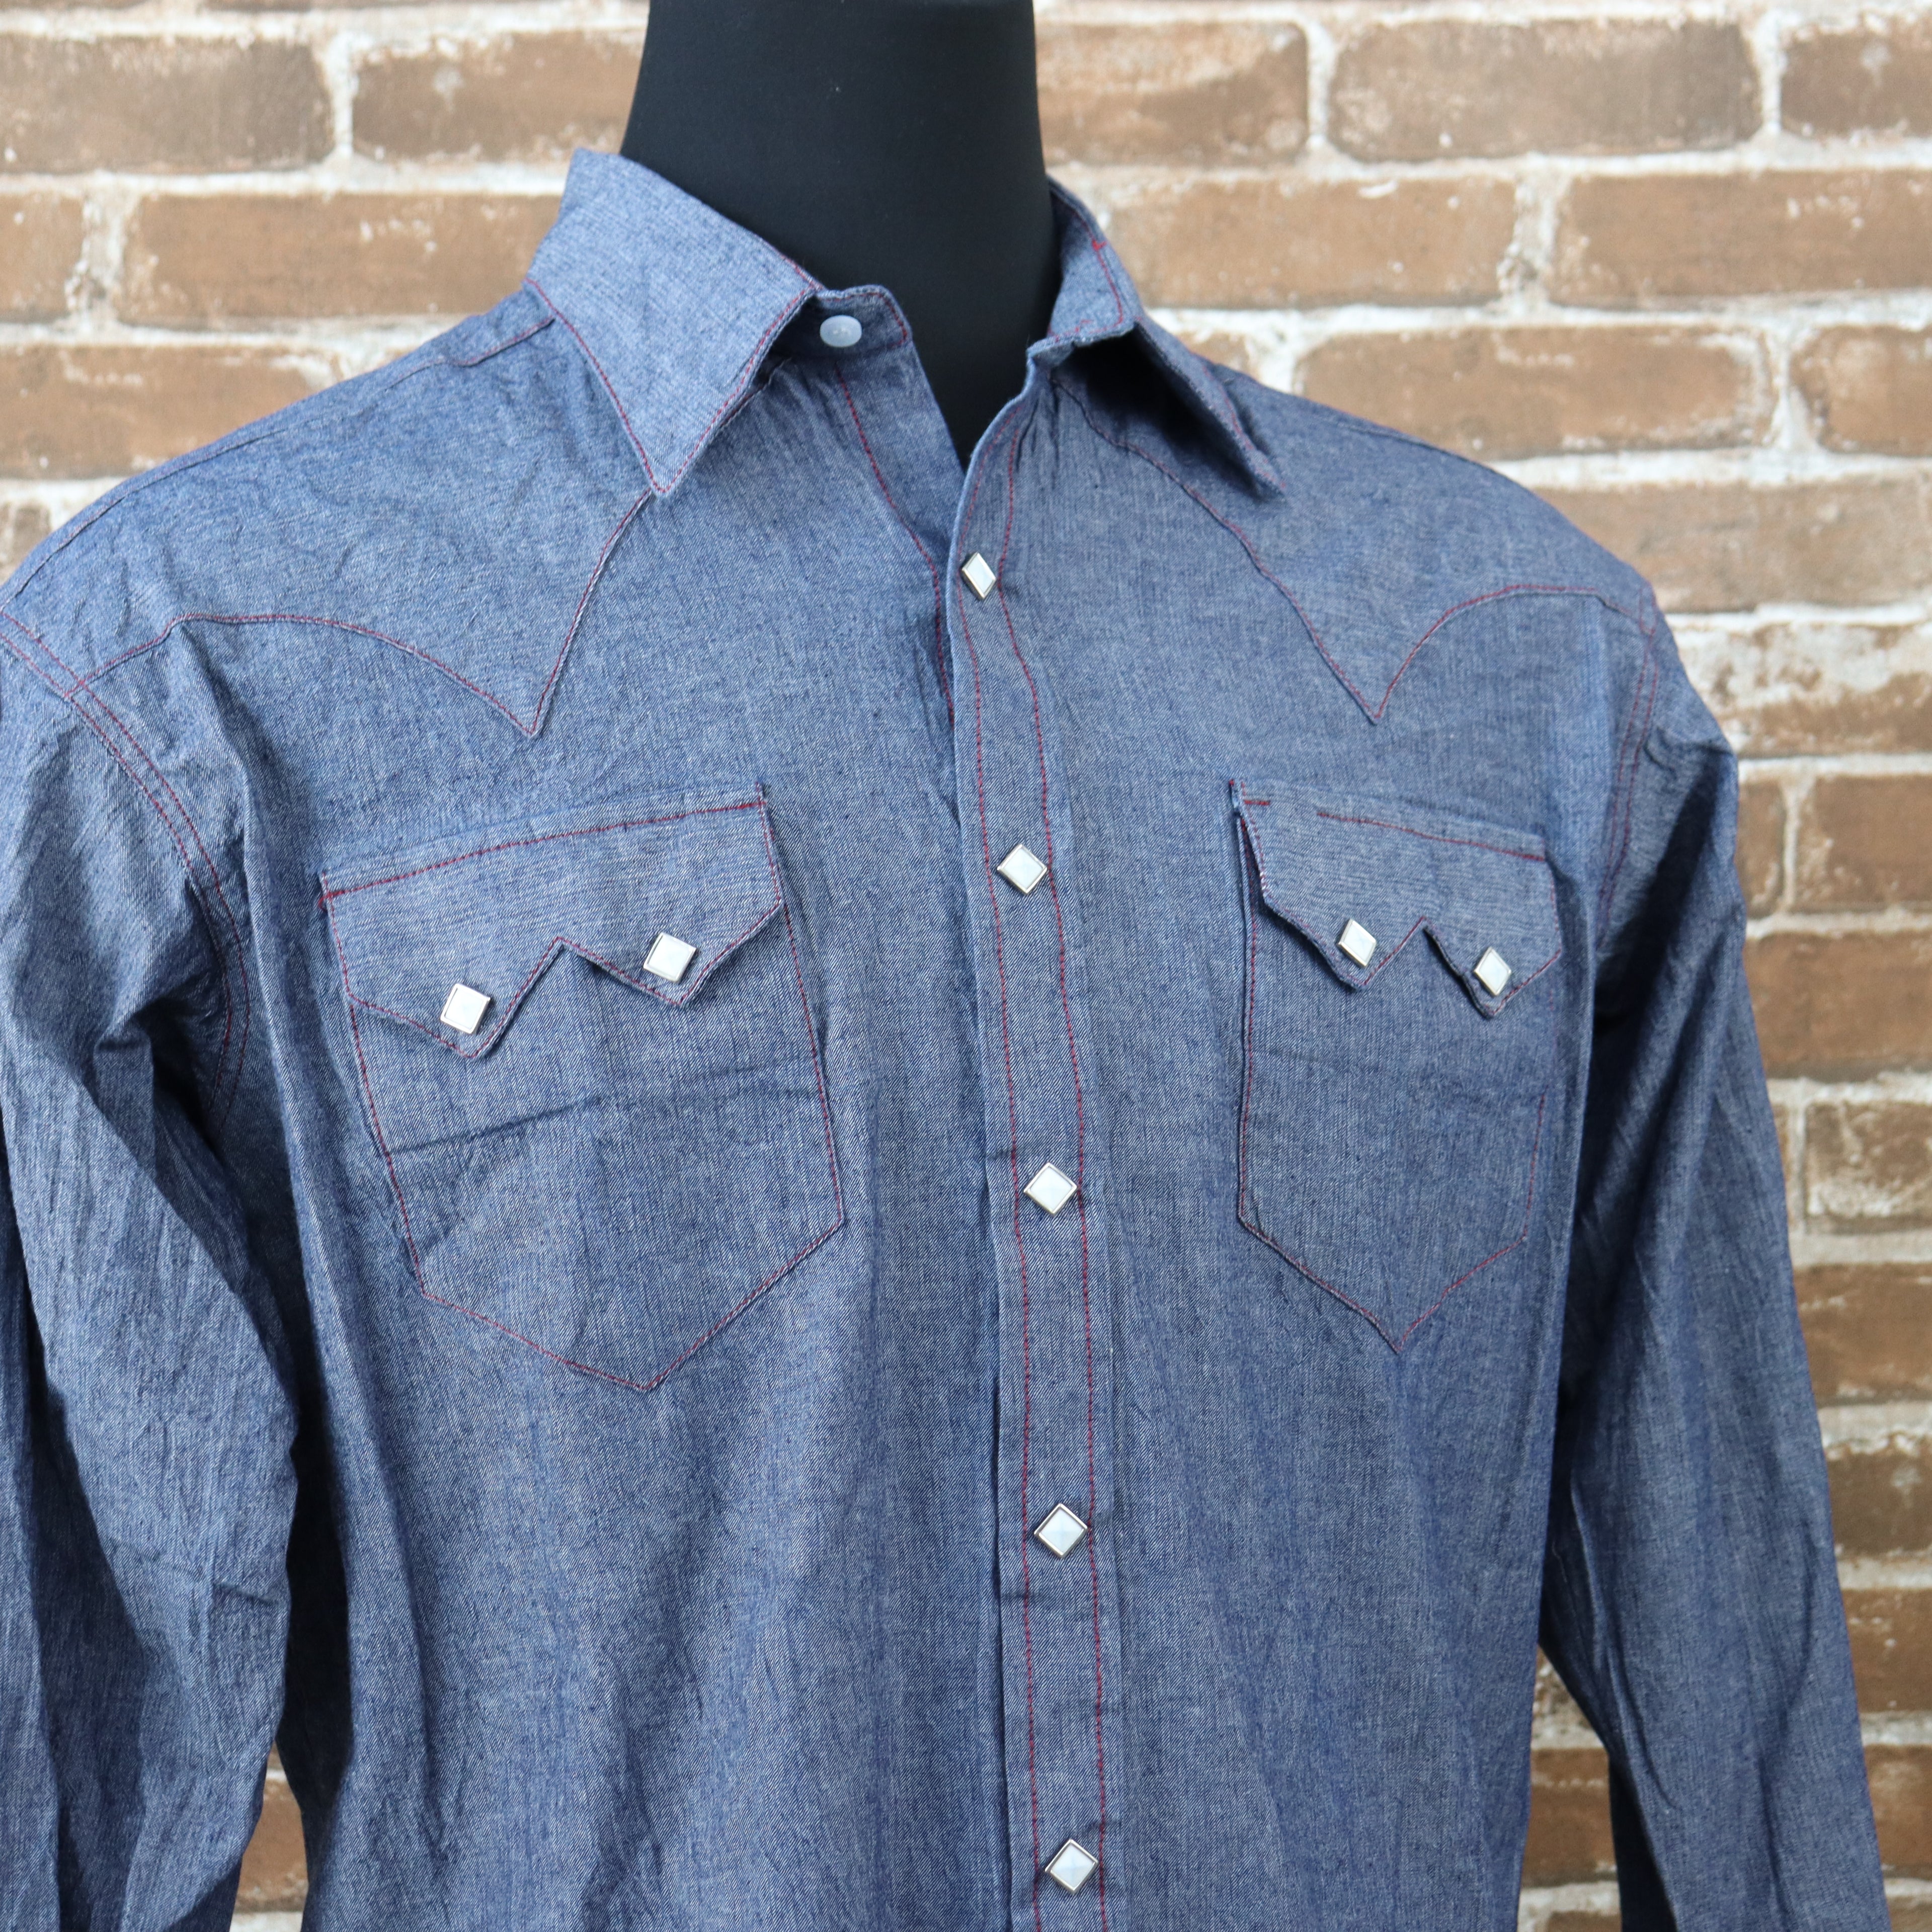 Rockmount Chambray in Blue Shirt